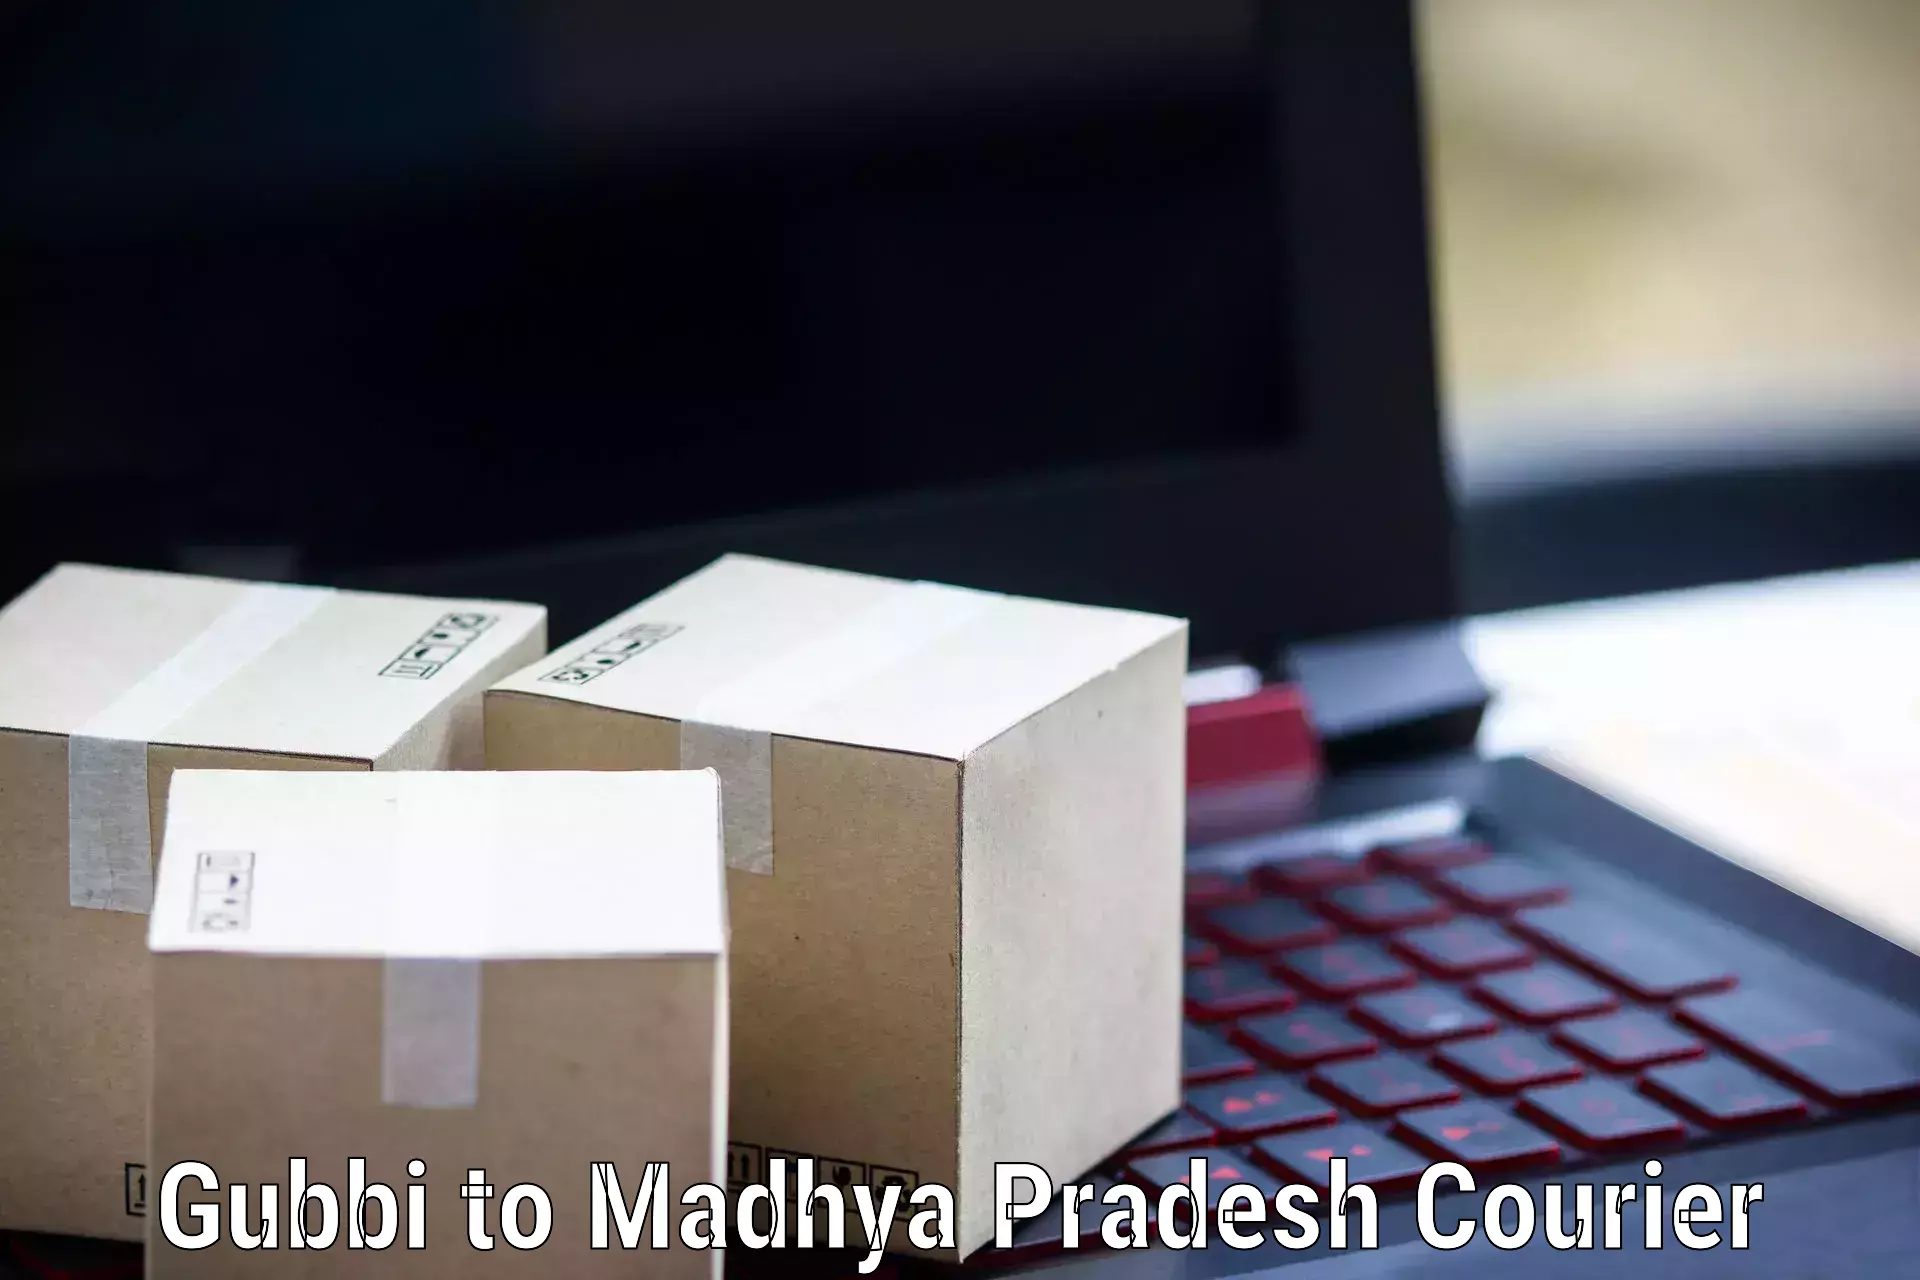 Full-service courier options Gubbi to Nainpur